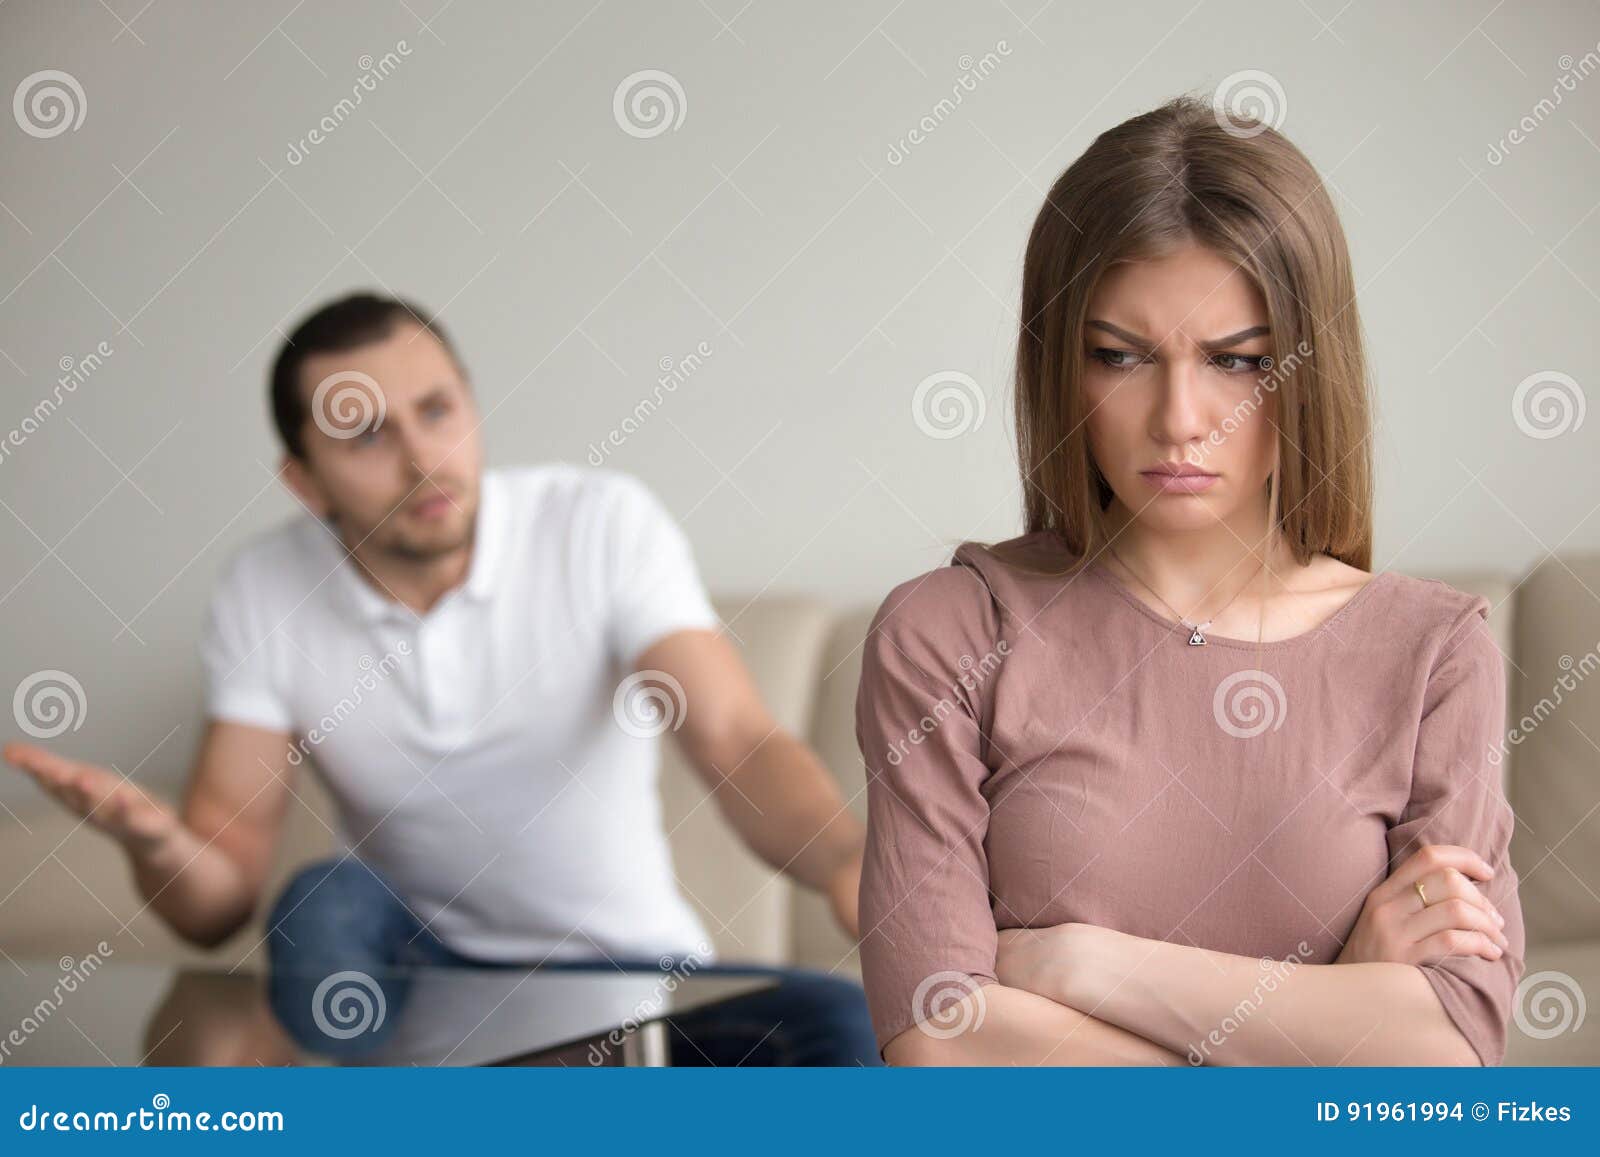 angry husband mad at wife, unhappy woman frustrated, family conf